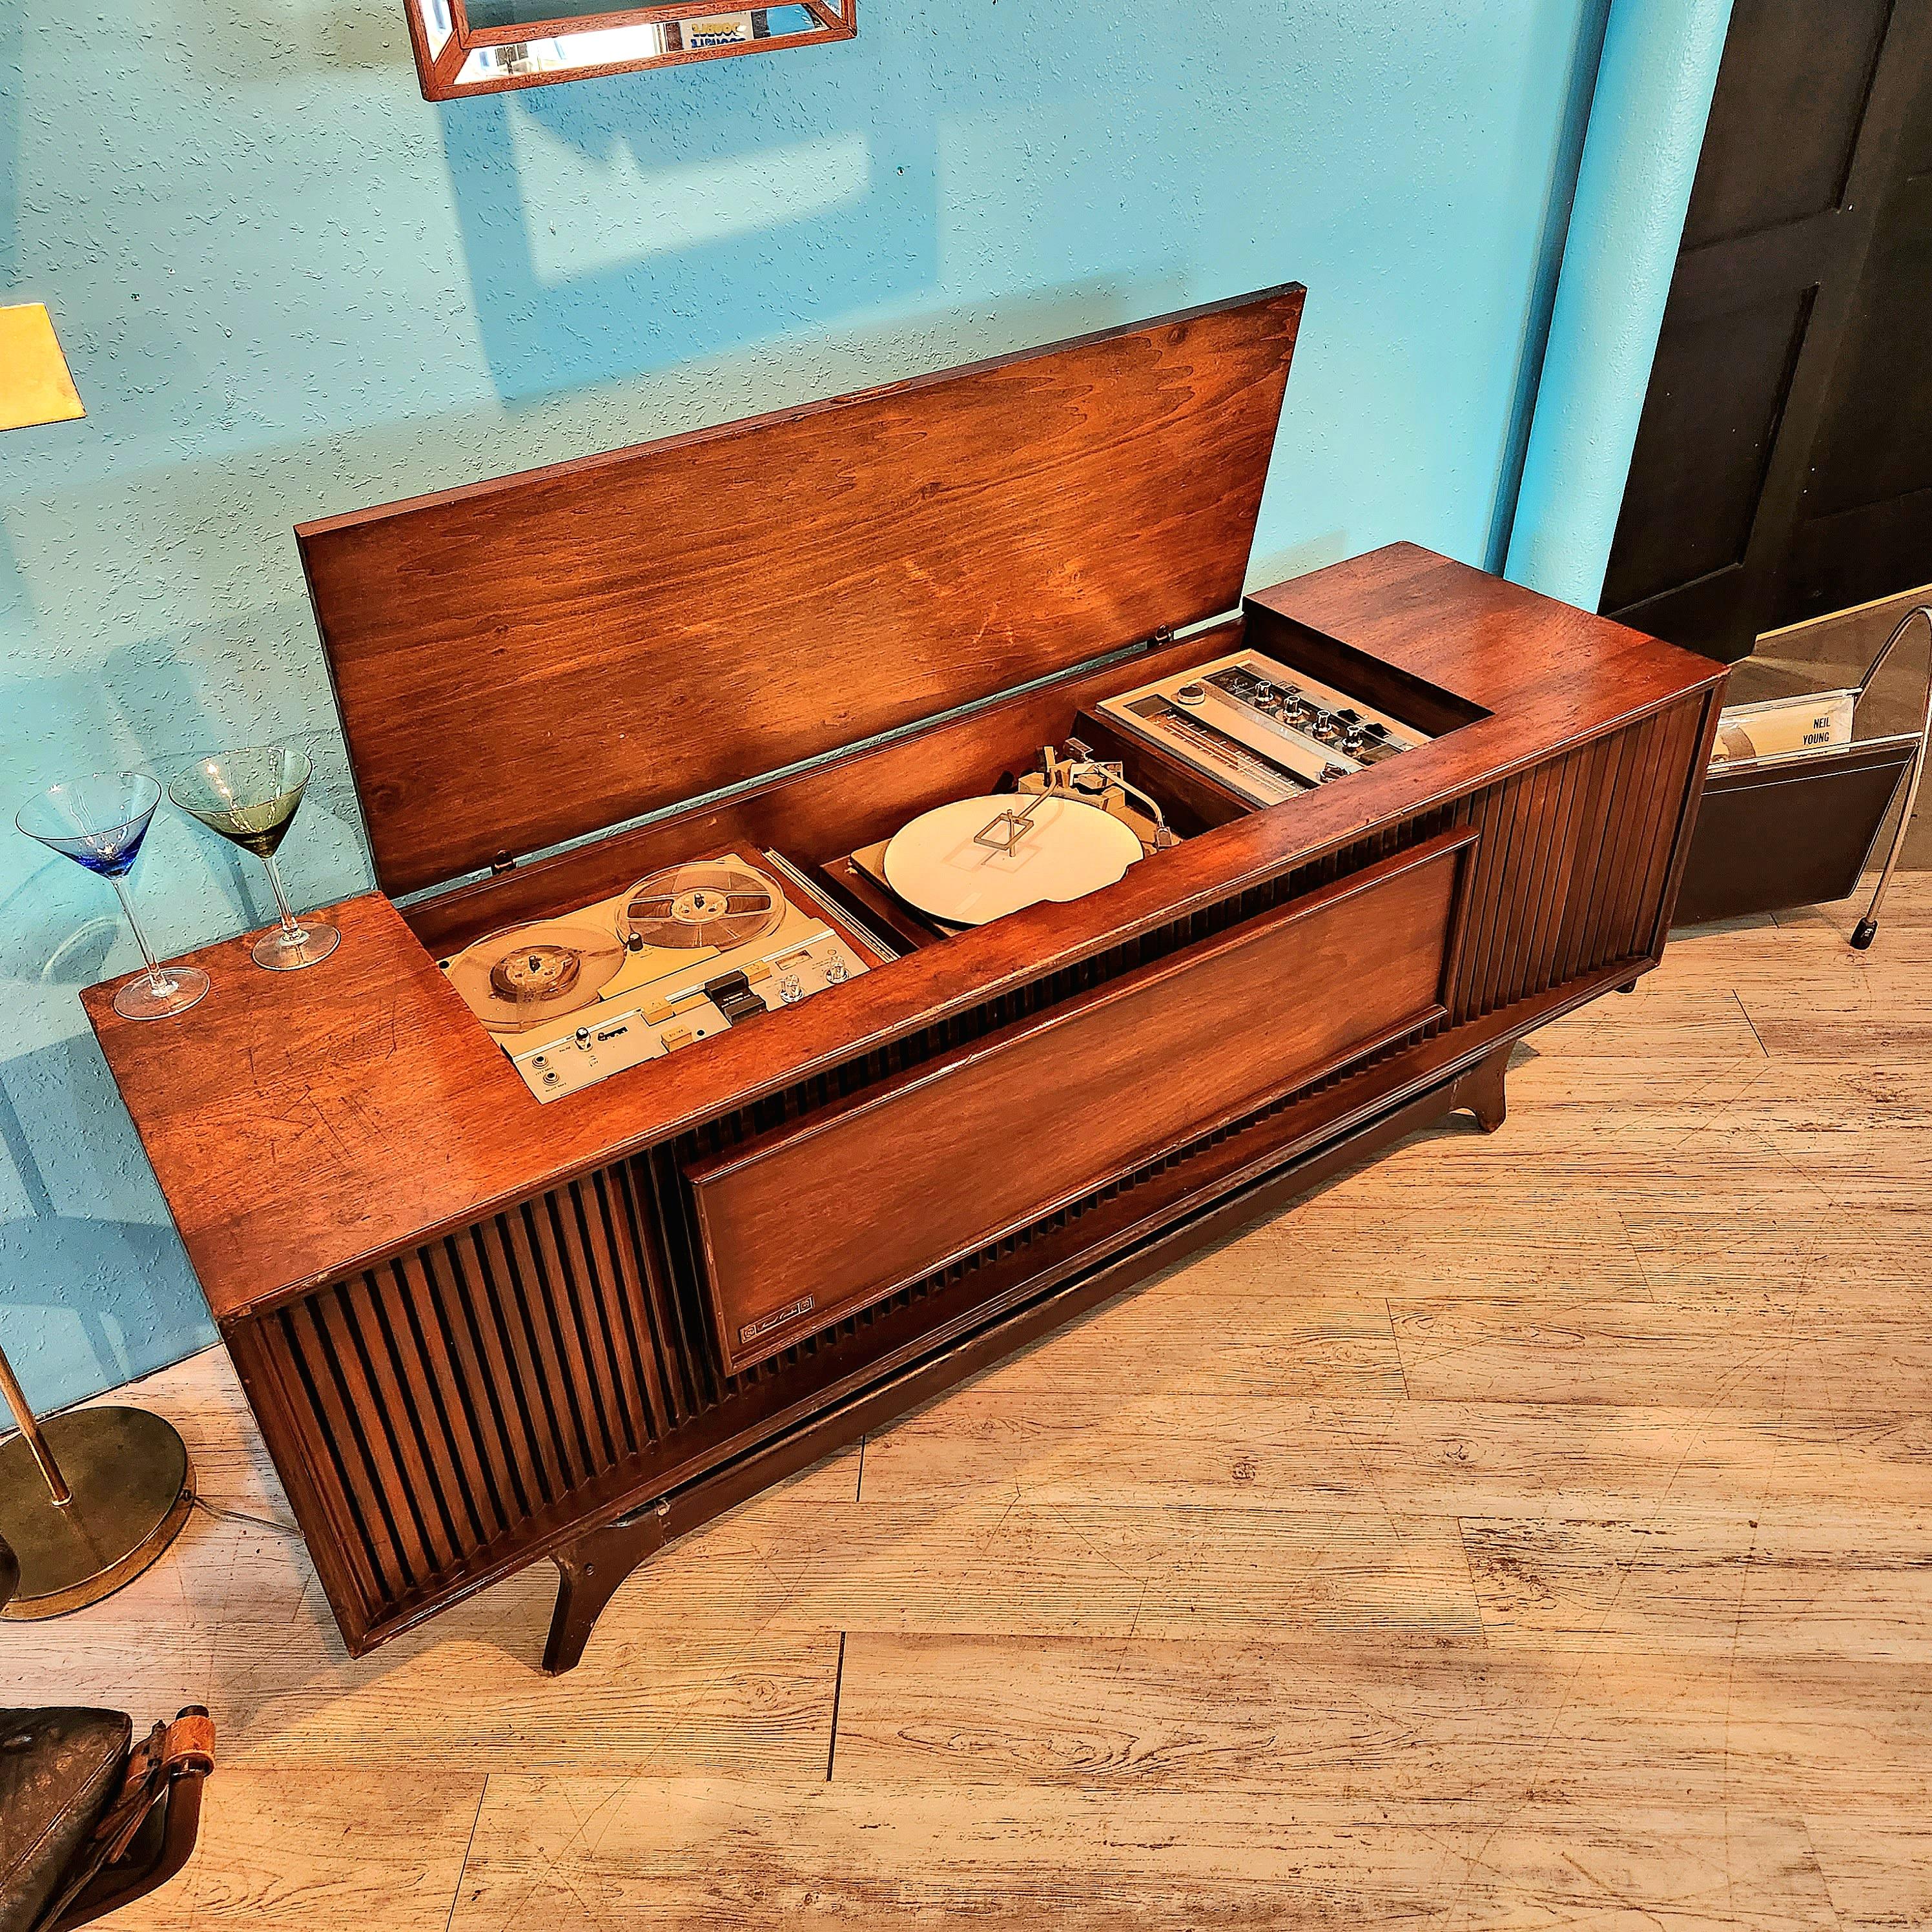 Woodwork Mid-Century Modern Stereo Console Bar Ge Record Player Refurbed Bluetooth